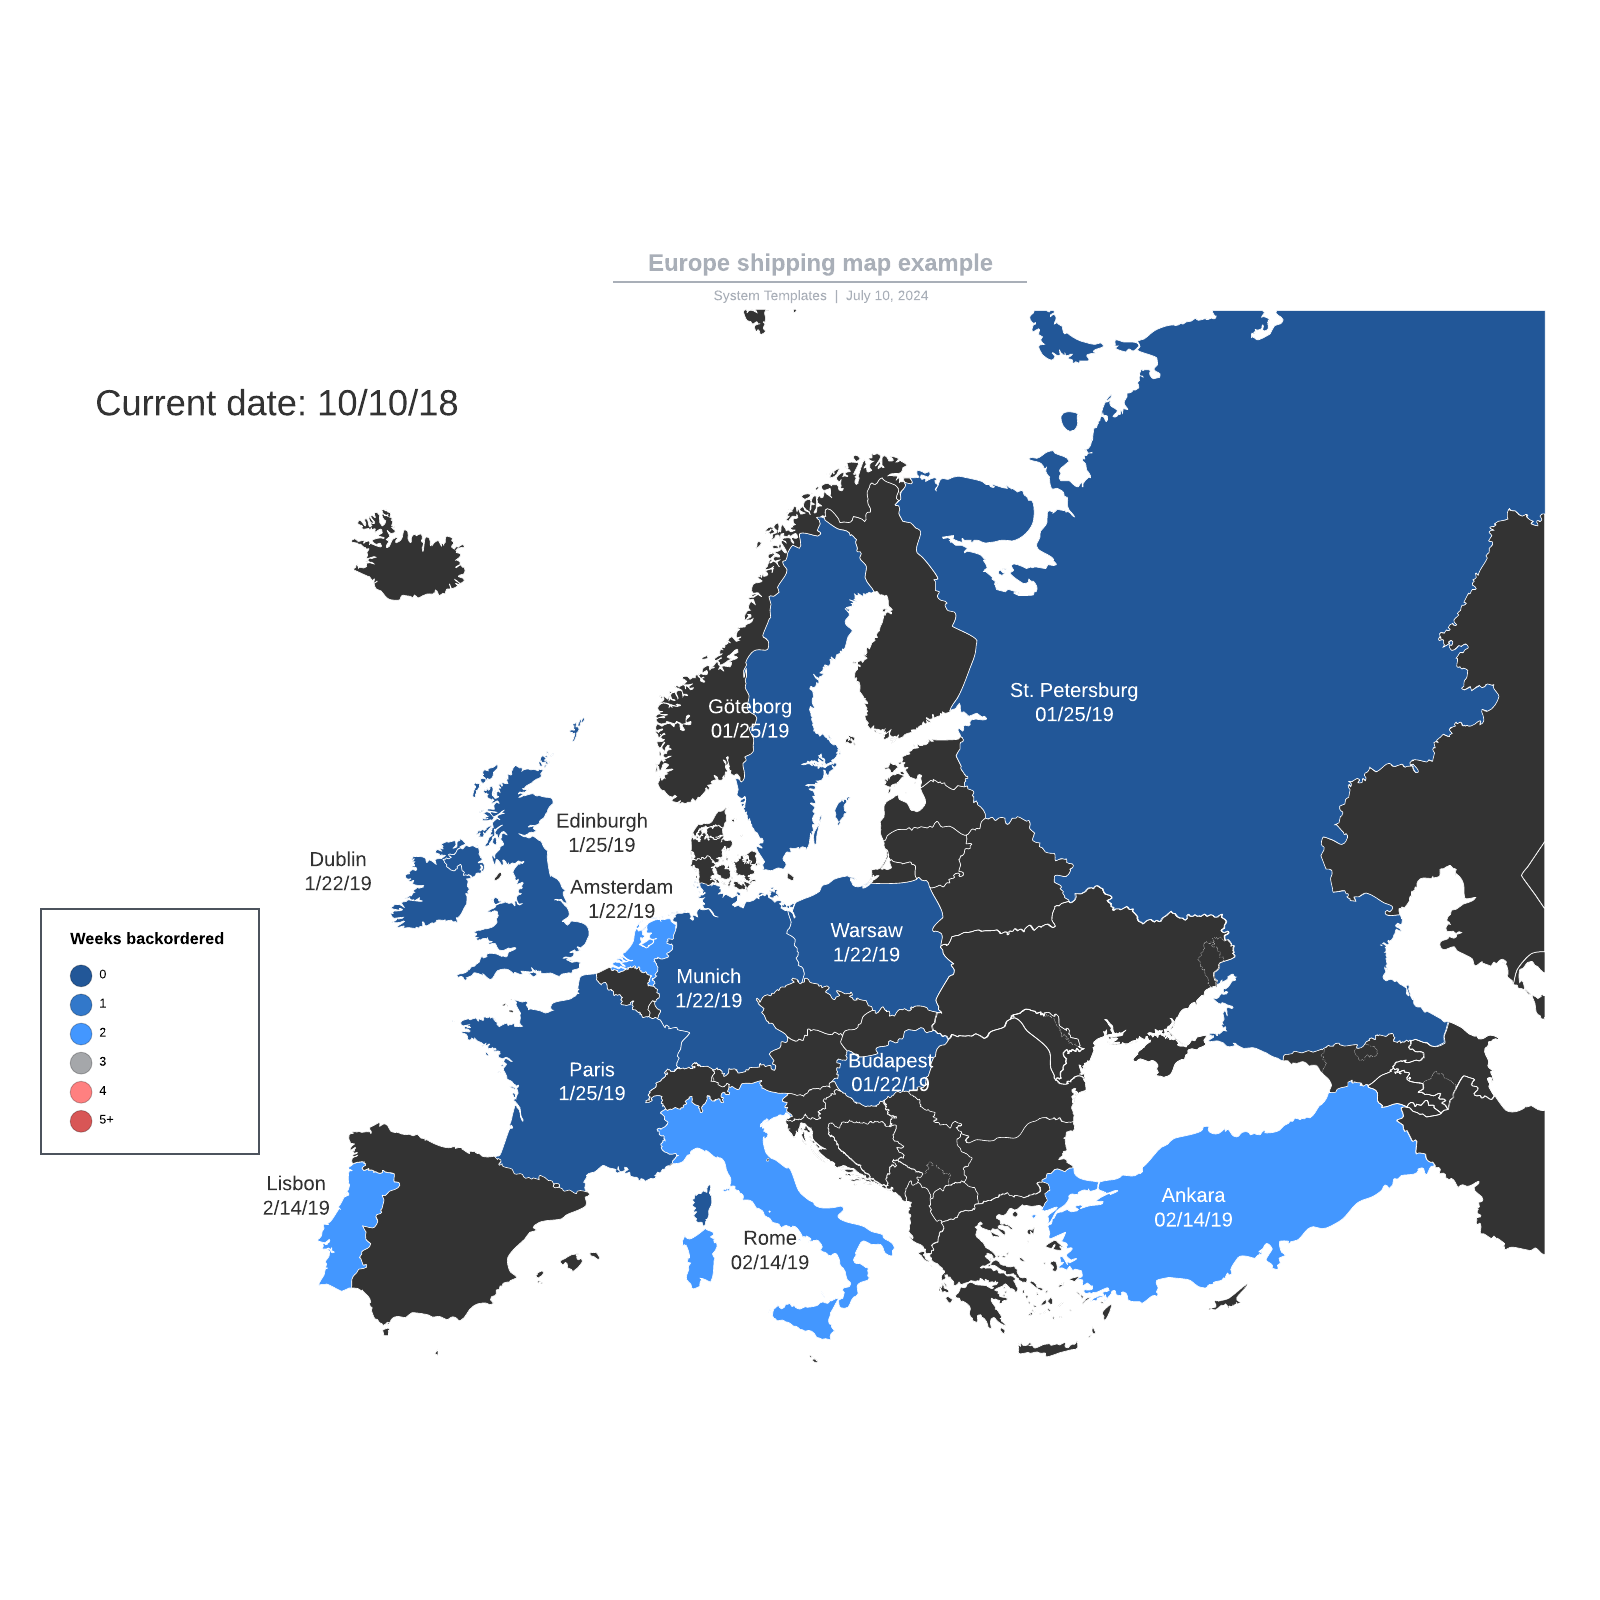 Europe shipping map example example